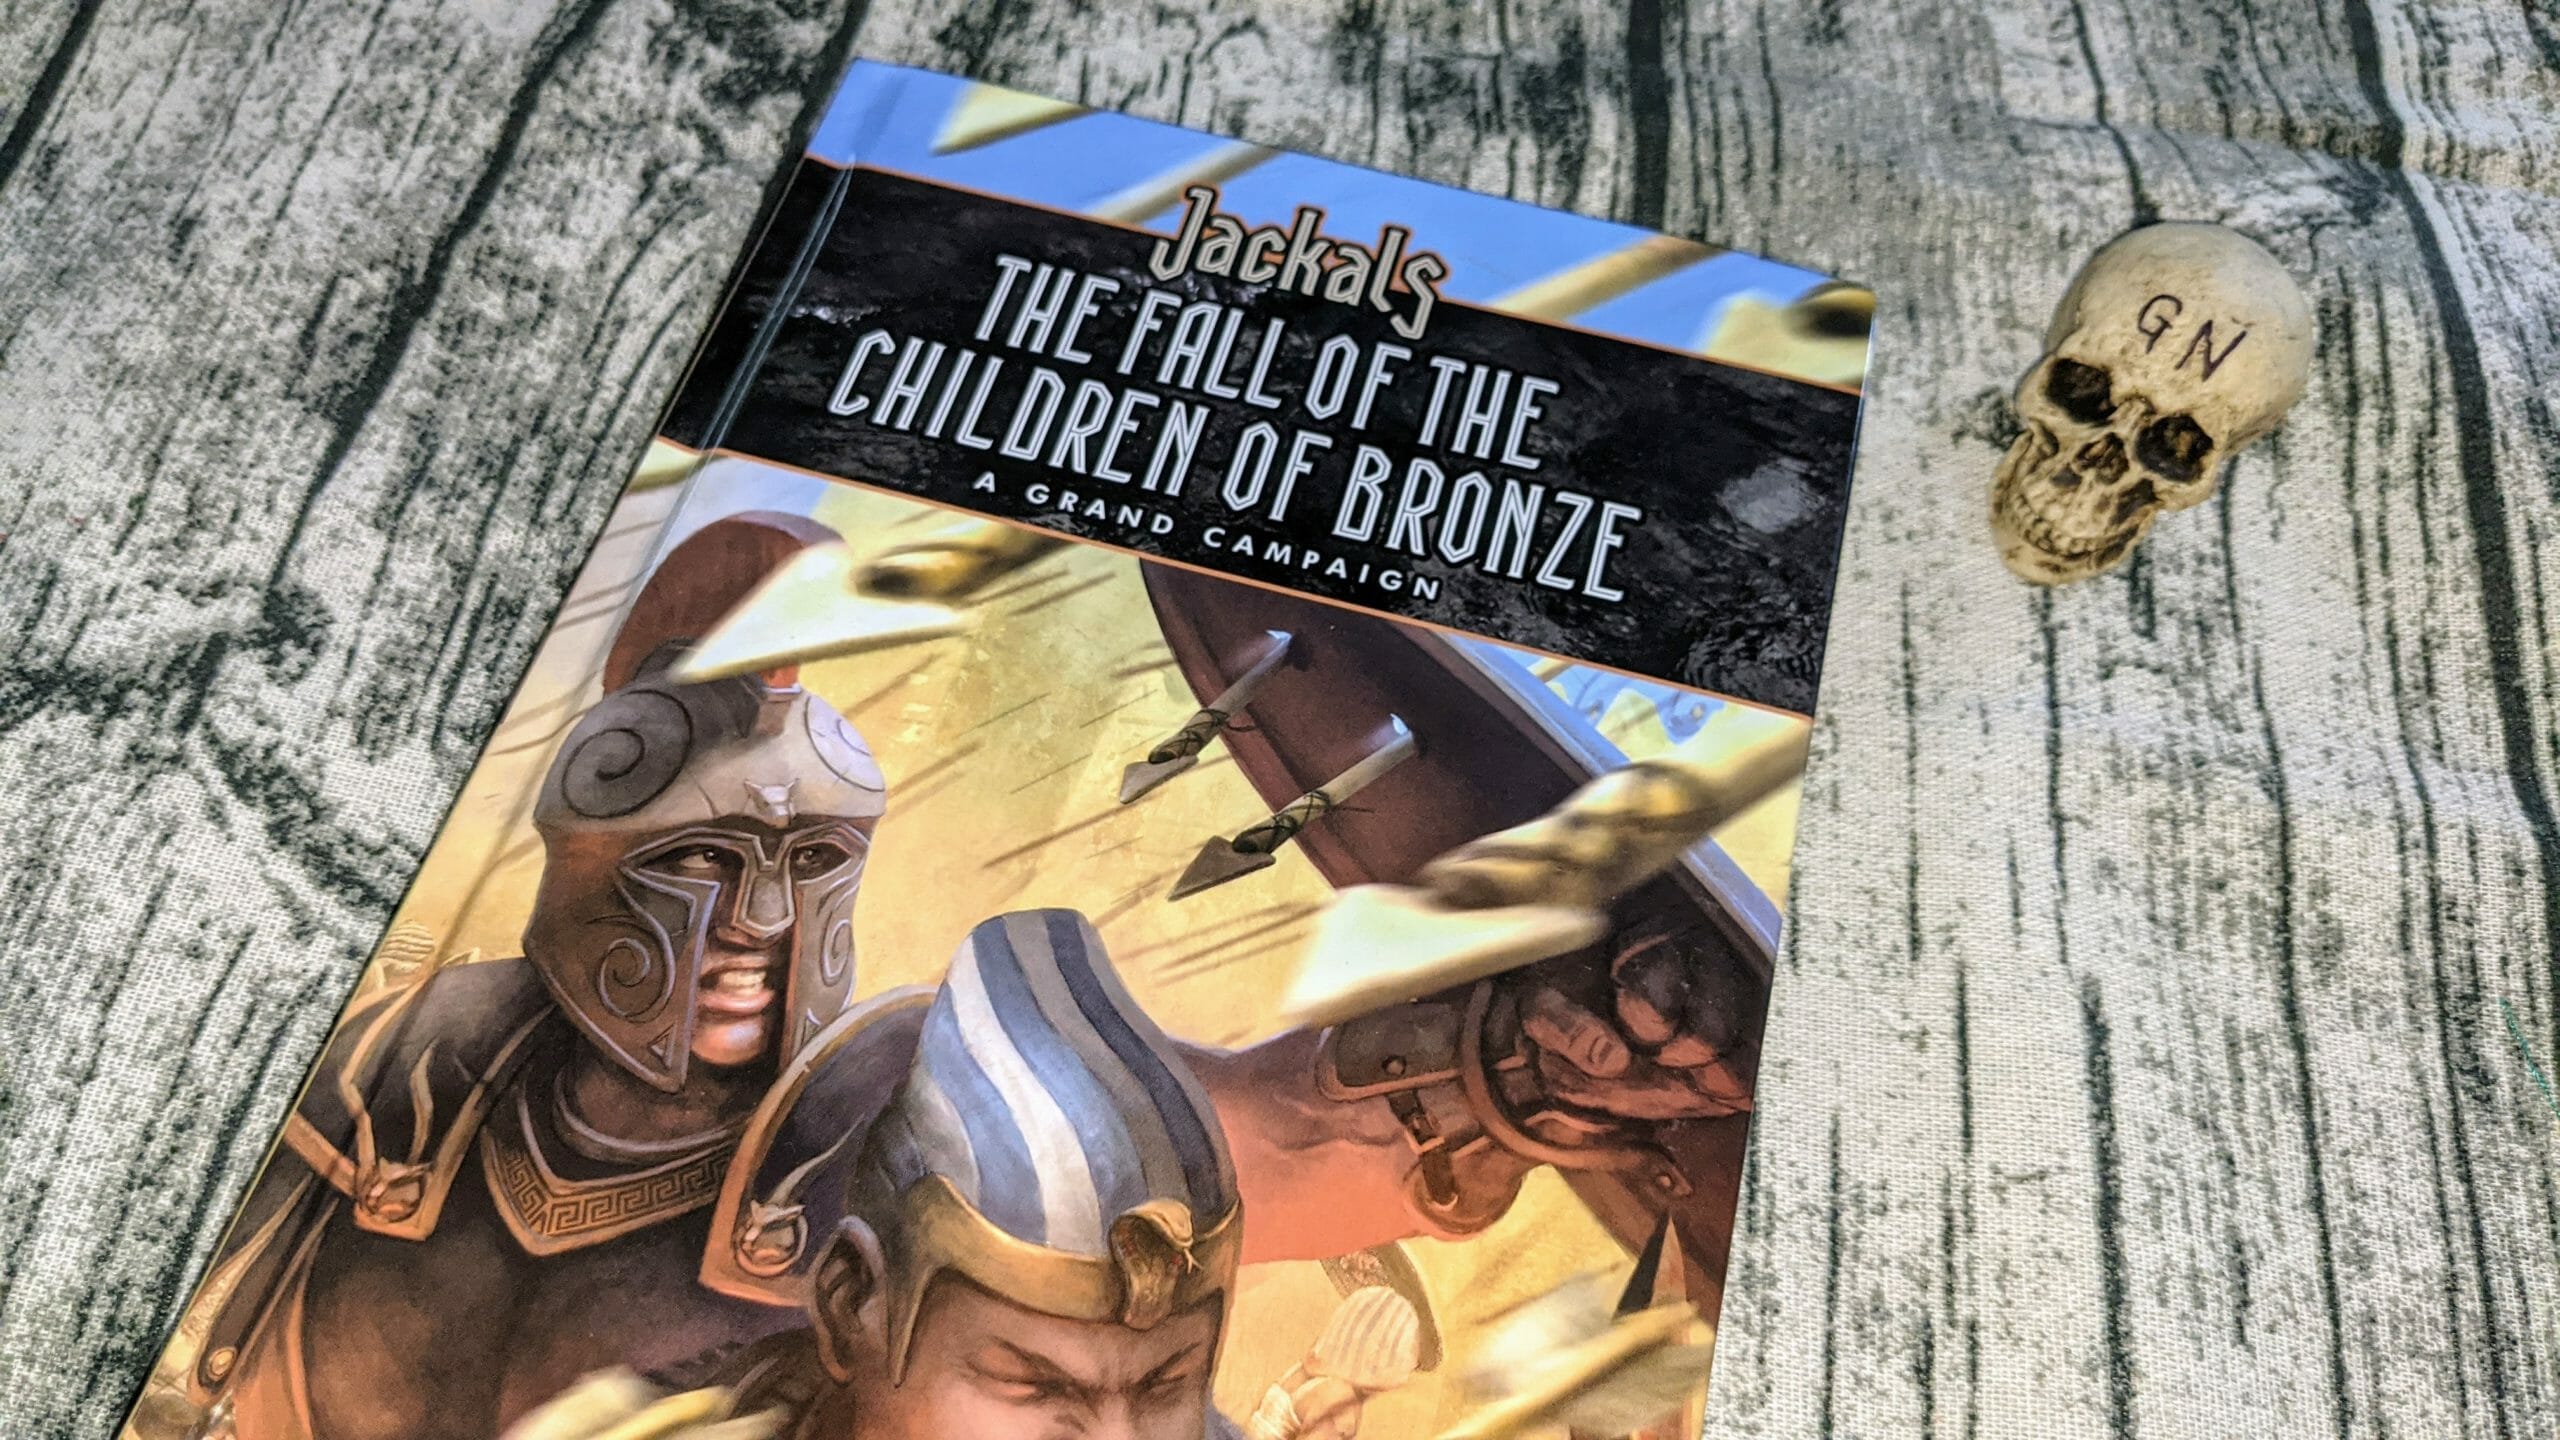 9 years of adventure: A review of Jackals – The Fall of the Children of Bronze